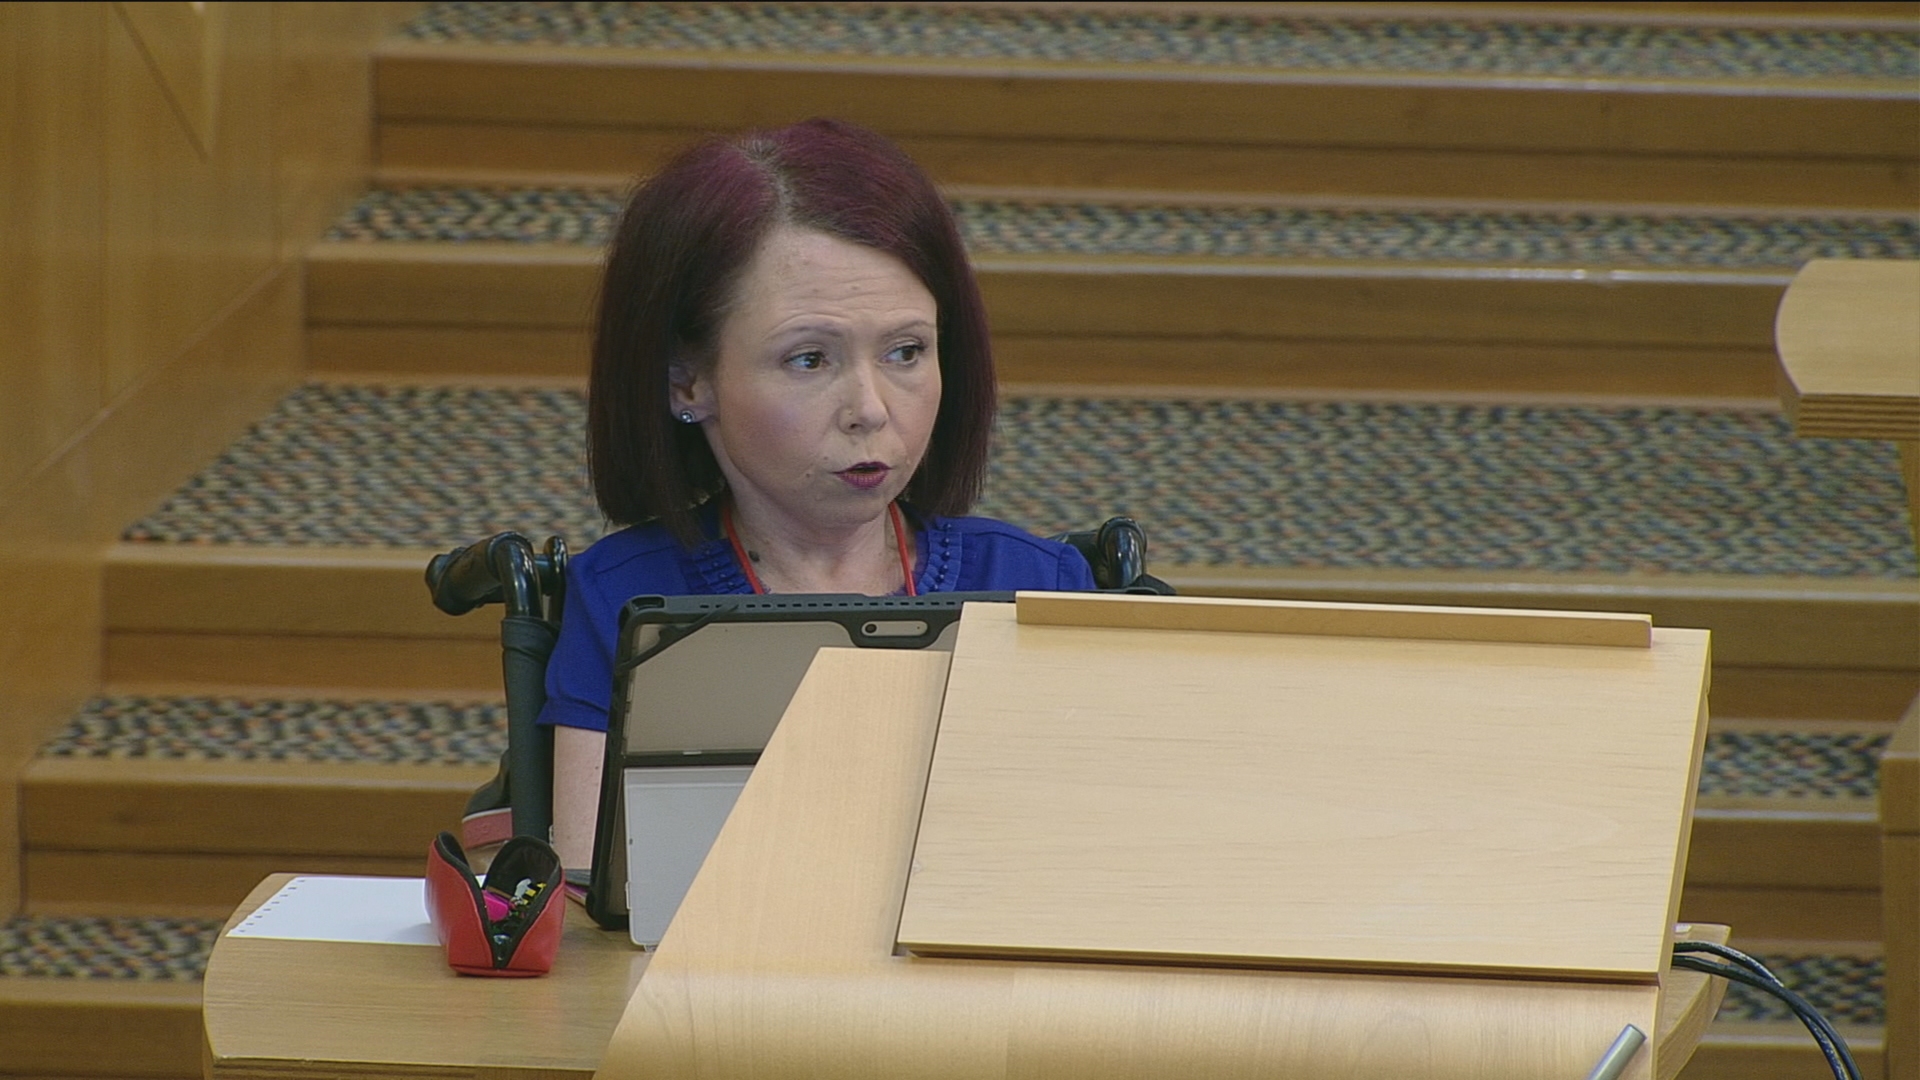 Scottish Labour MSP Pam Duncan-Glancy was elected last year. (STV News) 